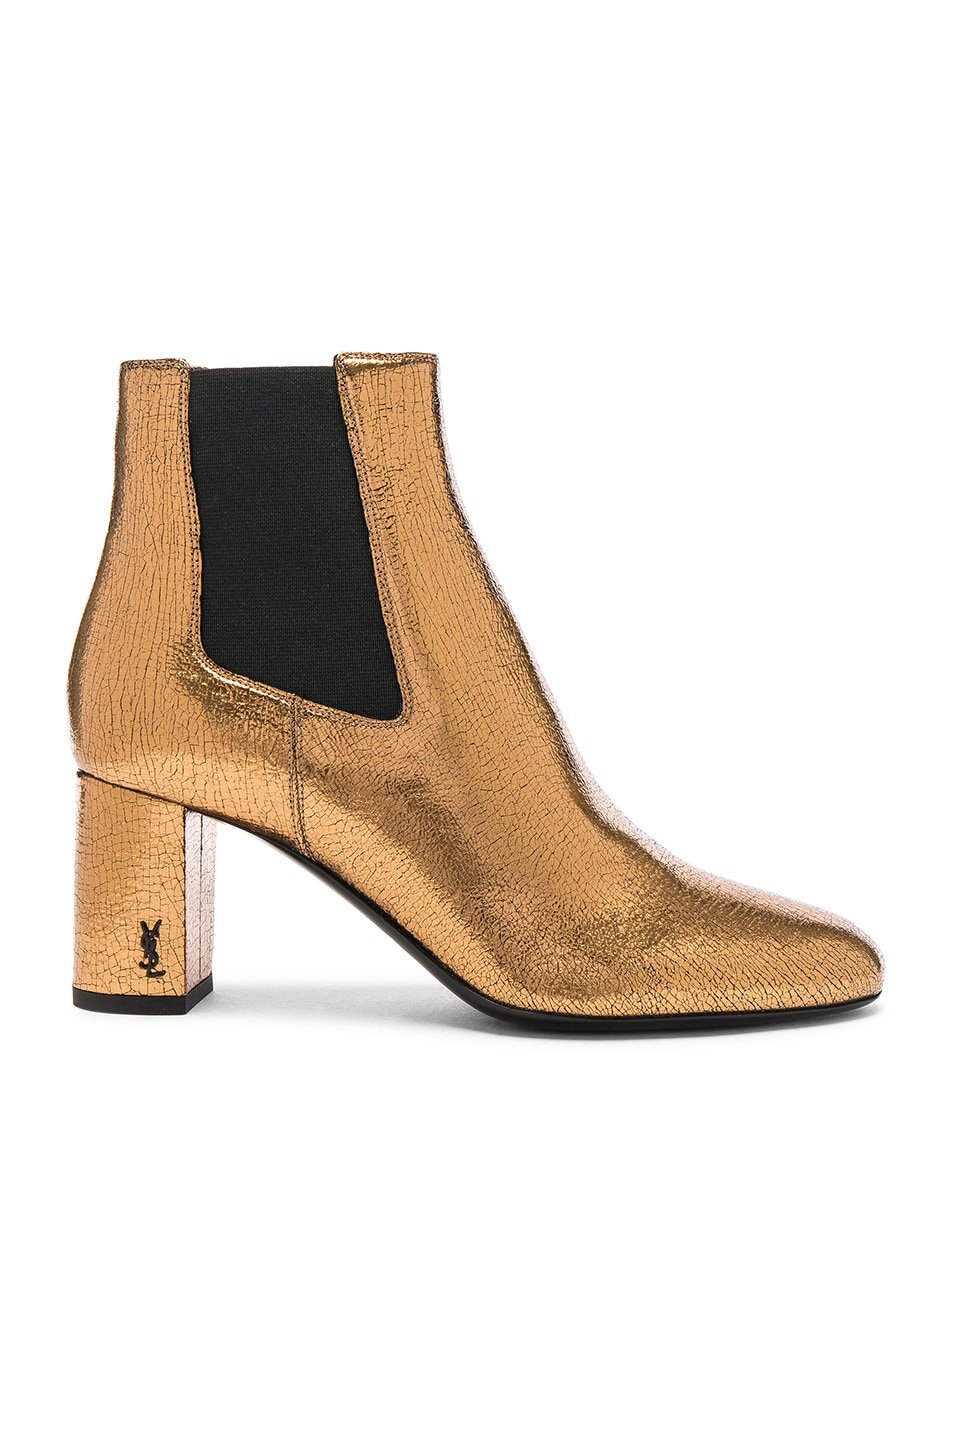 Image 1 of Saint Laurent Cracked Metallic Leather Loulou Pin Boots in Bronze